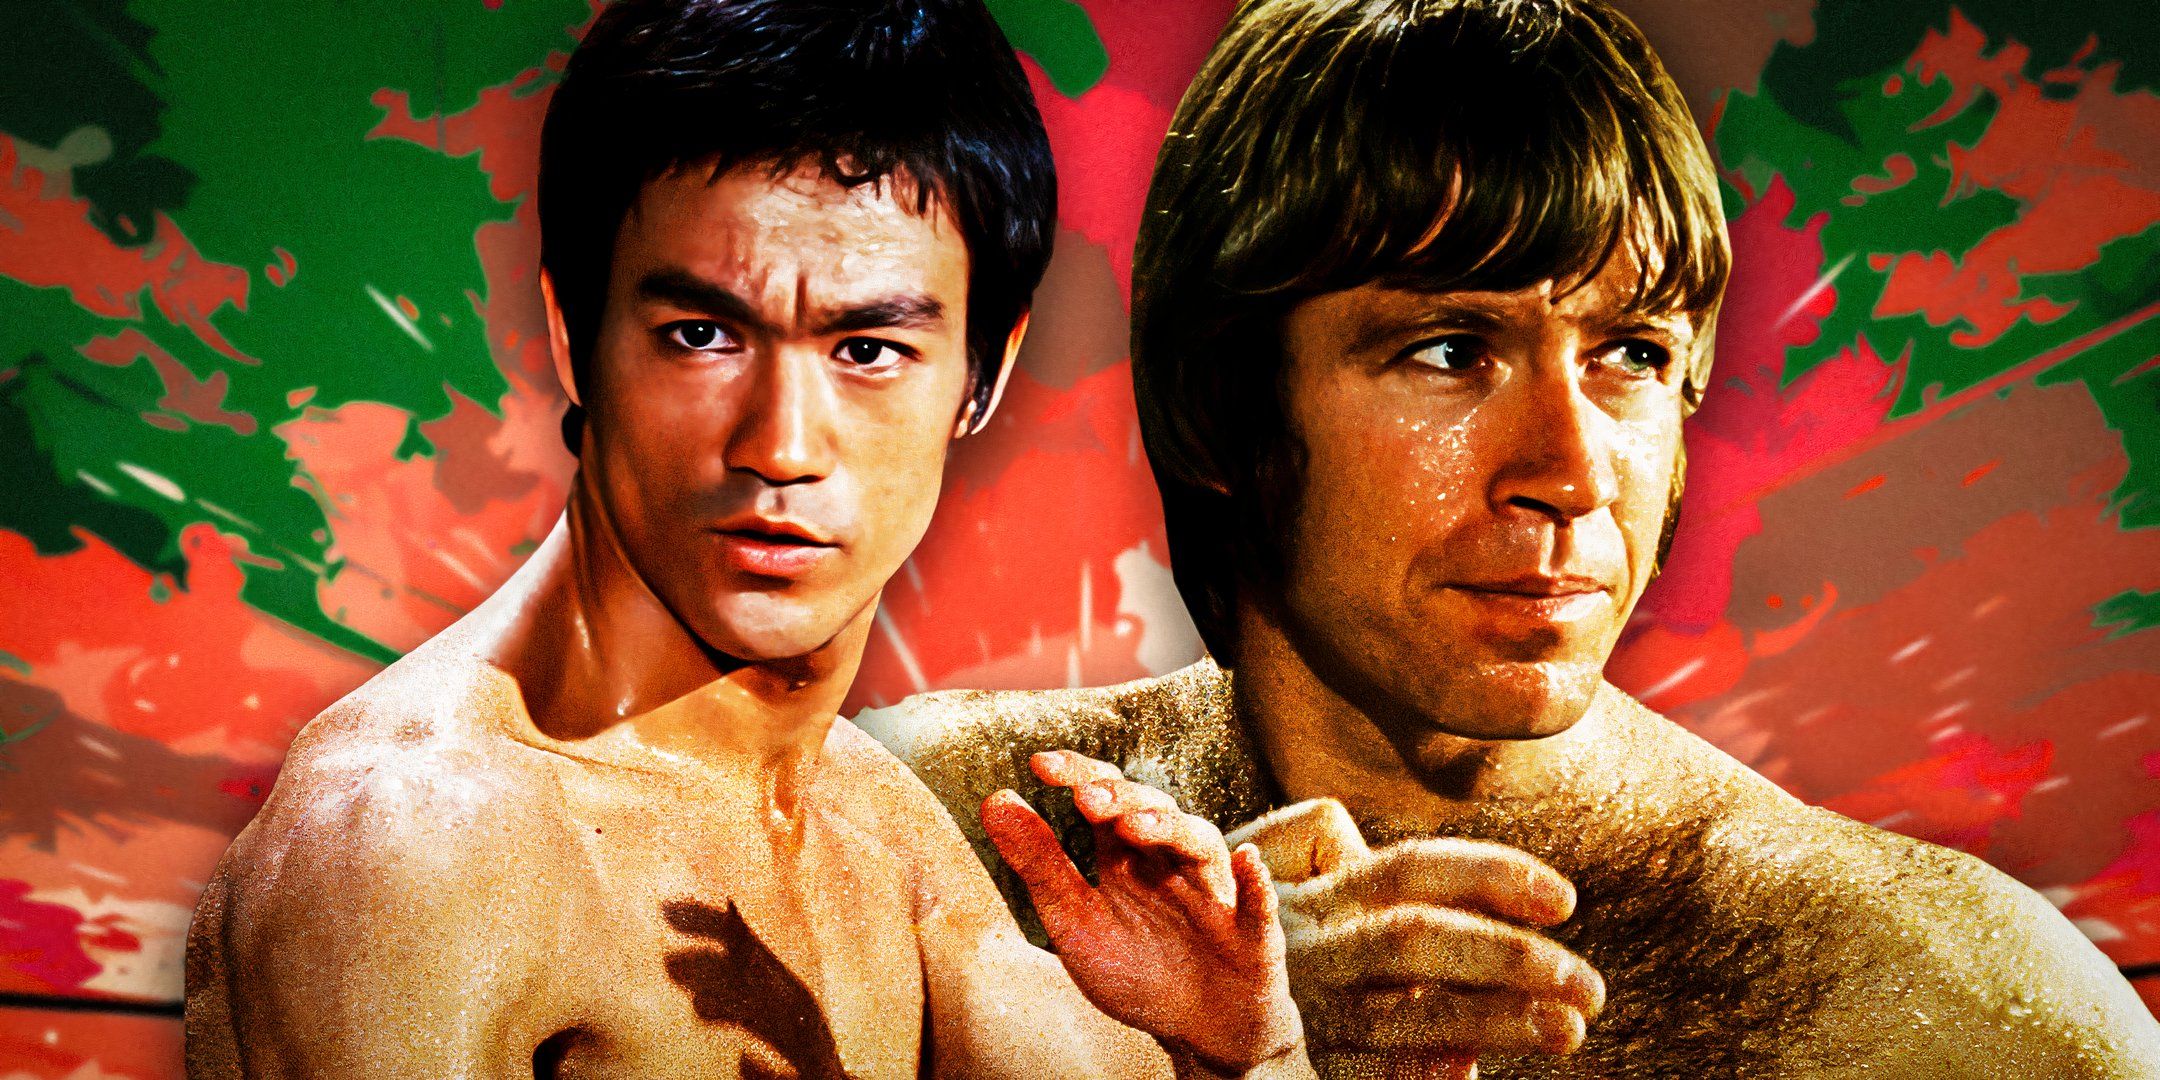 Chuck-Norris-as-Colt-and-Bruce-Lee-as-Tang-Lung---The-Way-of-the-Dragon